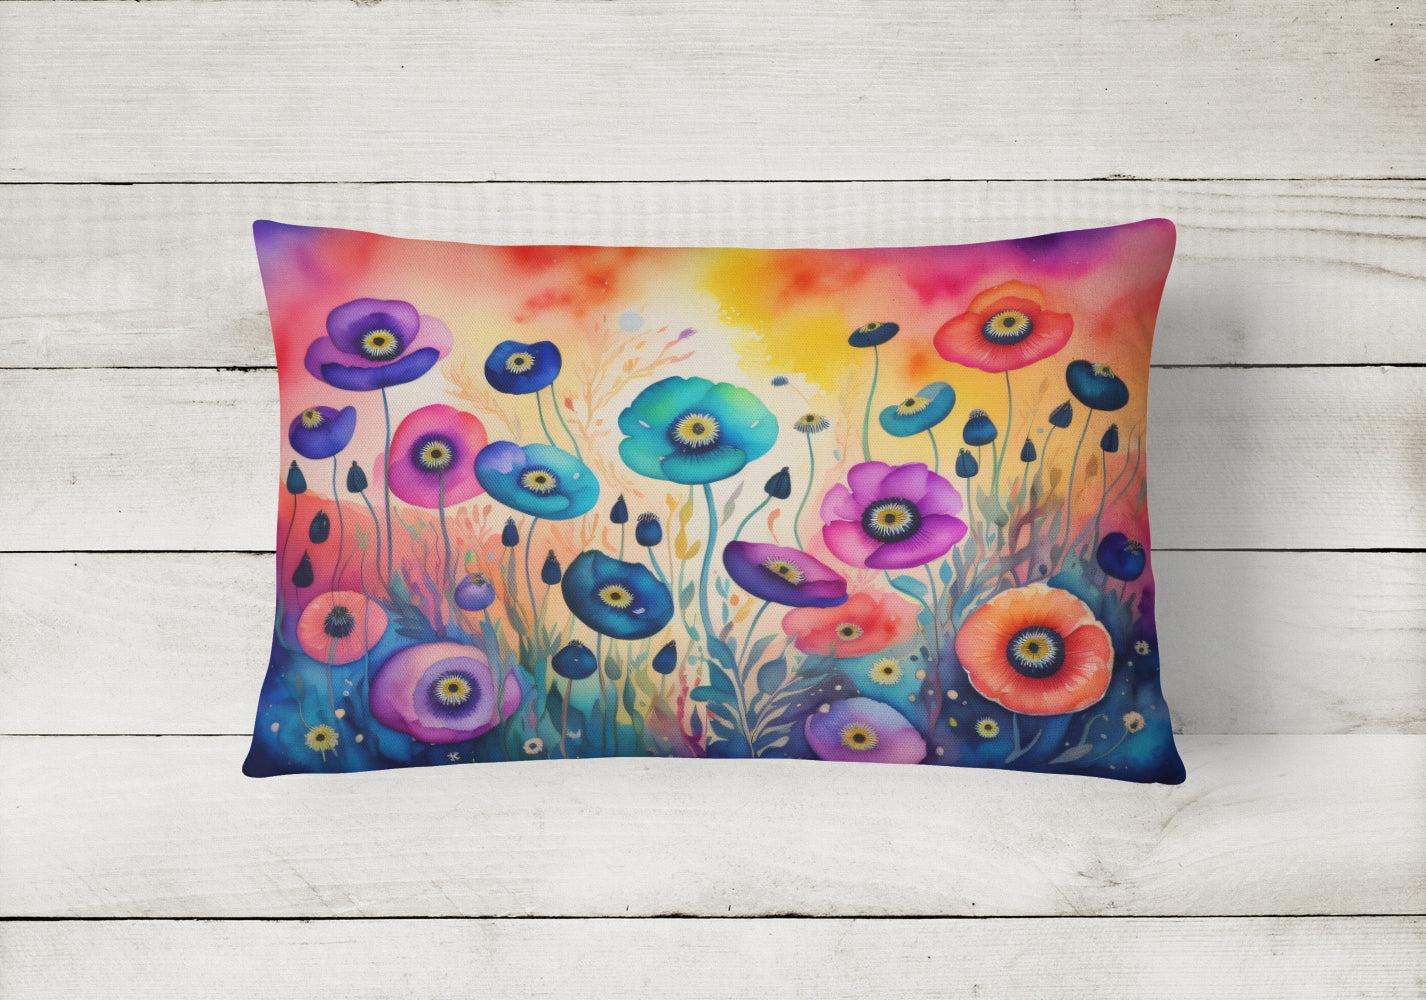 Buy this Anemones in Color Fabric Decorative Pillow